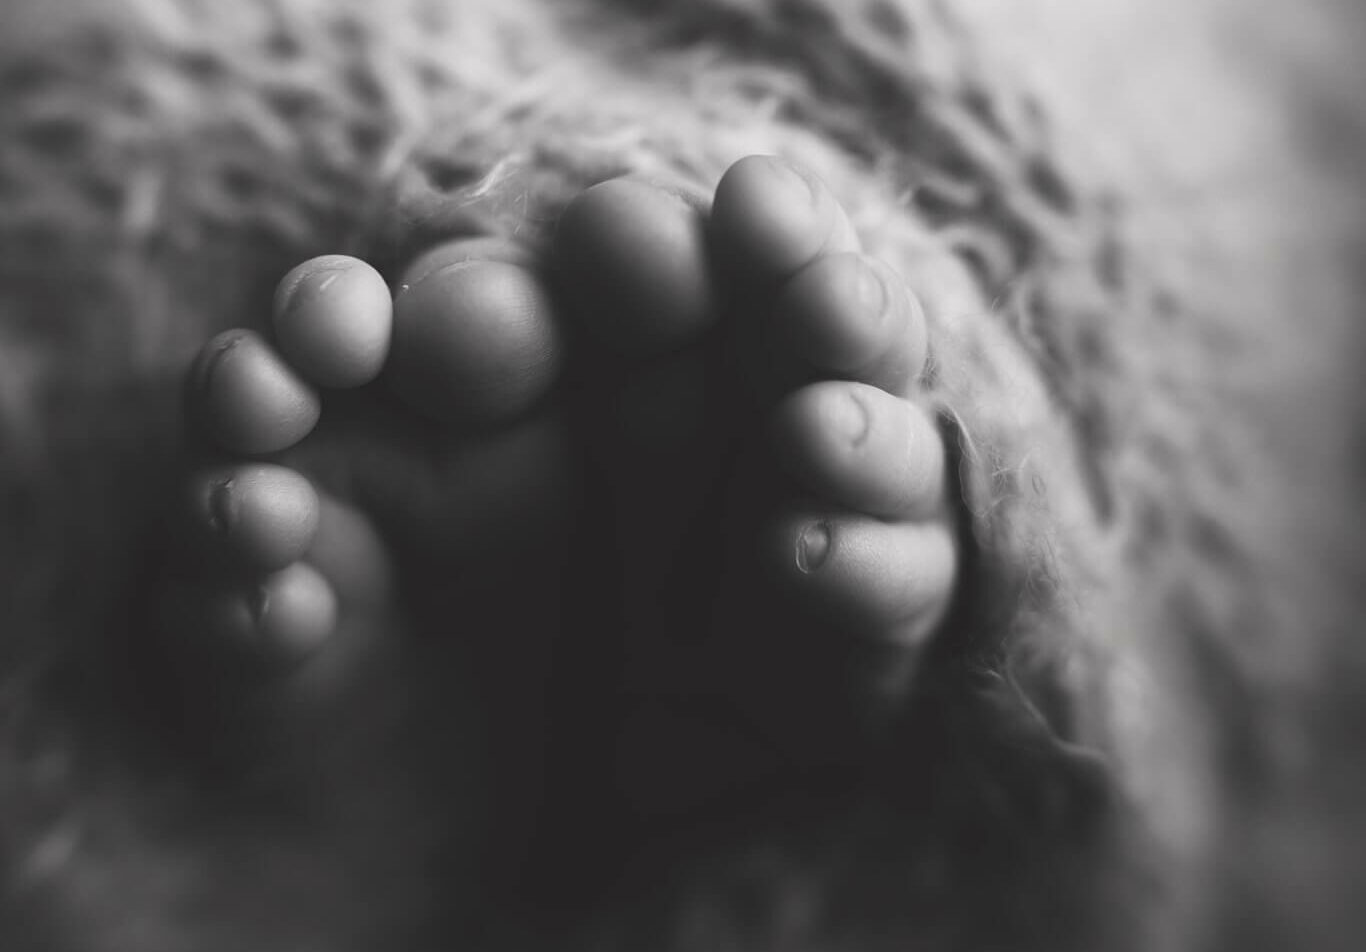 Black and white image of adorable baby toes wrapped in a blanket